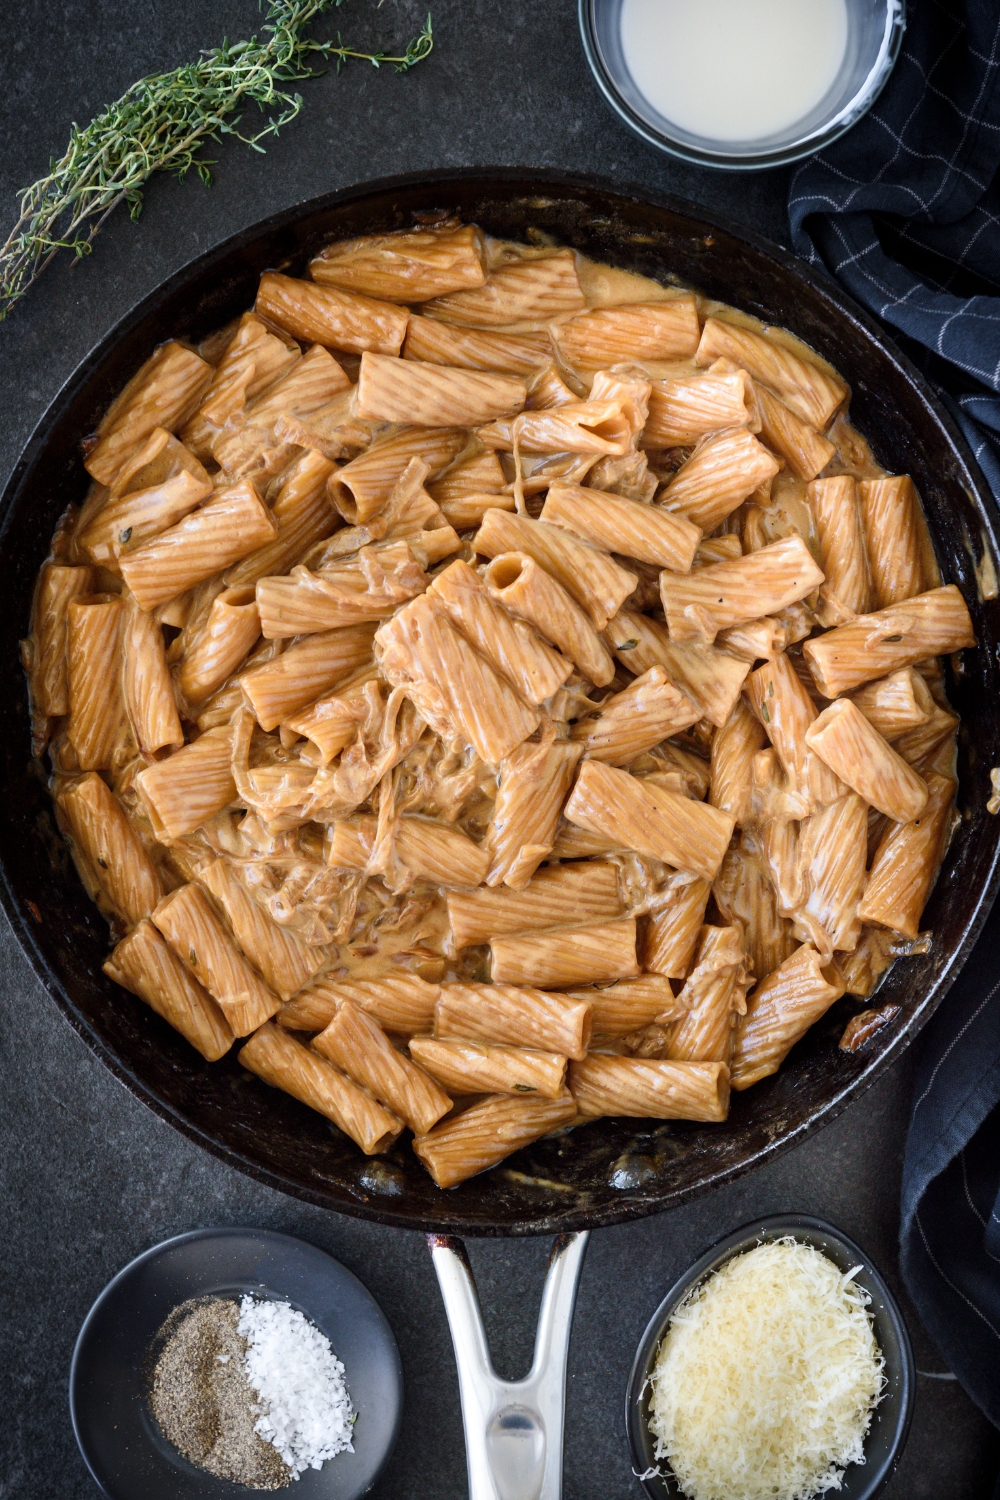 A skillet filled with cooked pasta tossed in a brown cream sauce with caramelized onions mixed in the pasta.